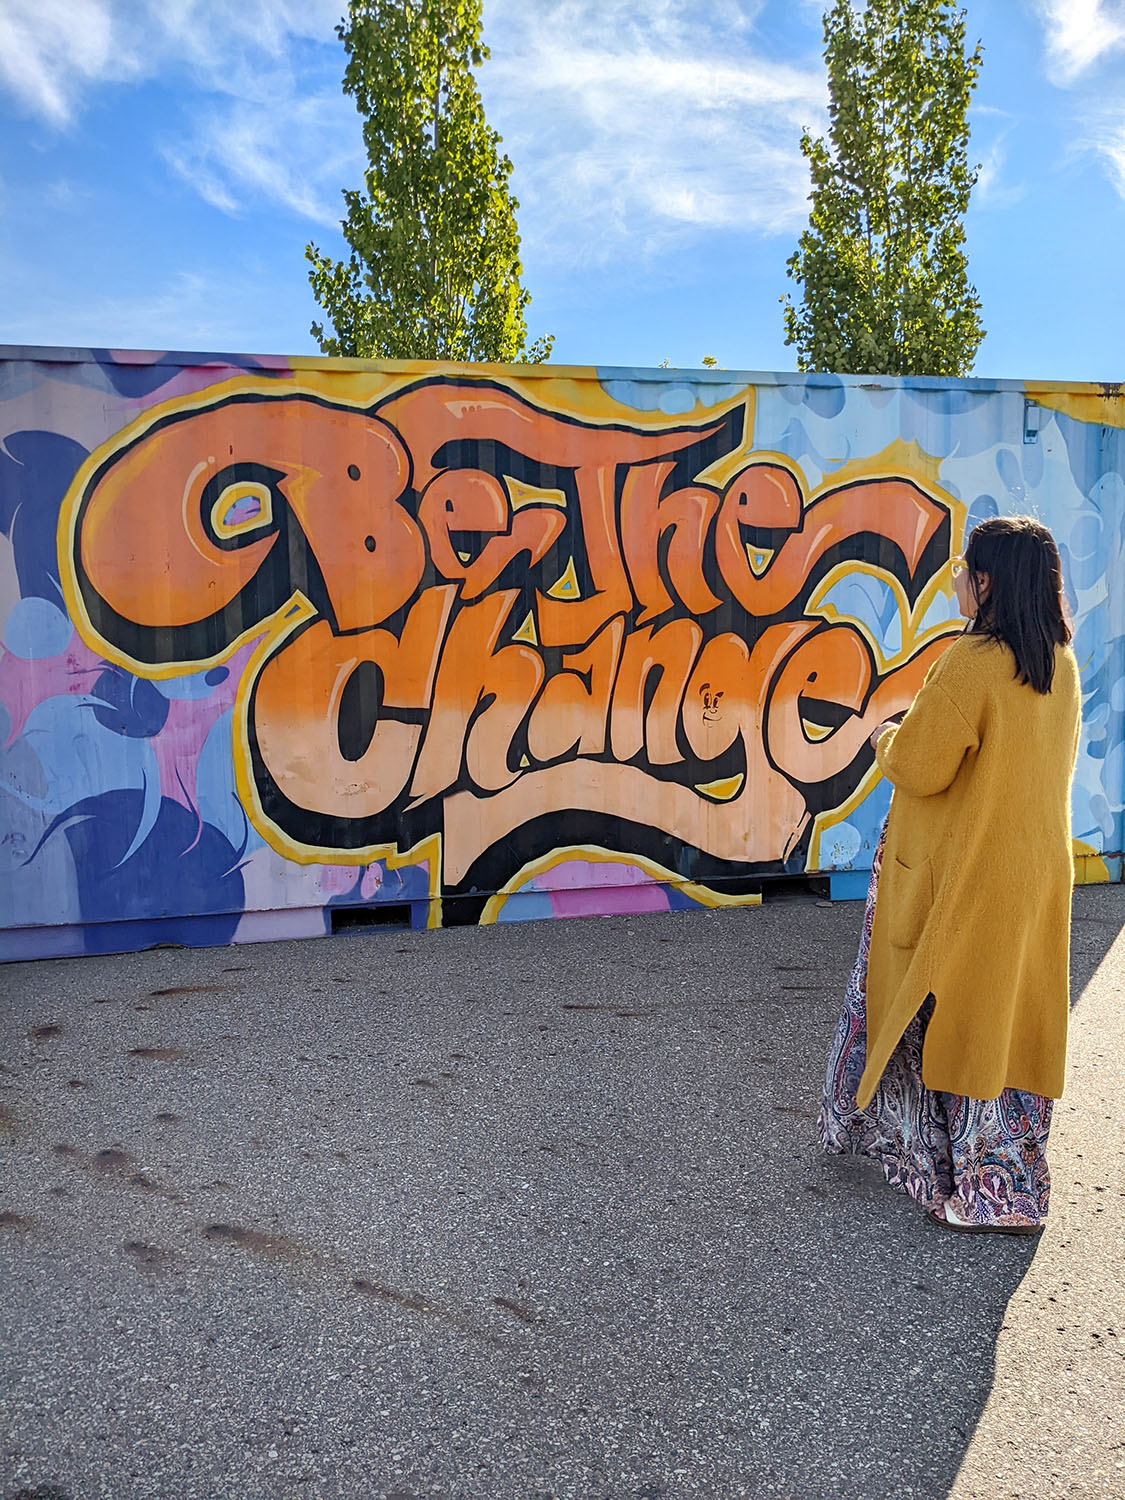 Explore Northern Alberta - Fort McMurray Wood Buffalo Region - Things to Do Food to Eat Where to Stay - Instagrammable Wall Mural Art